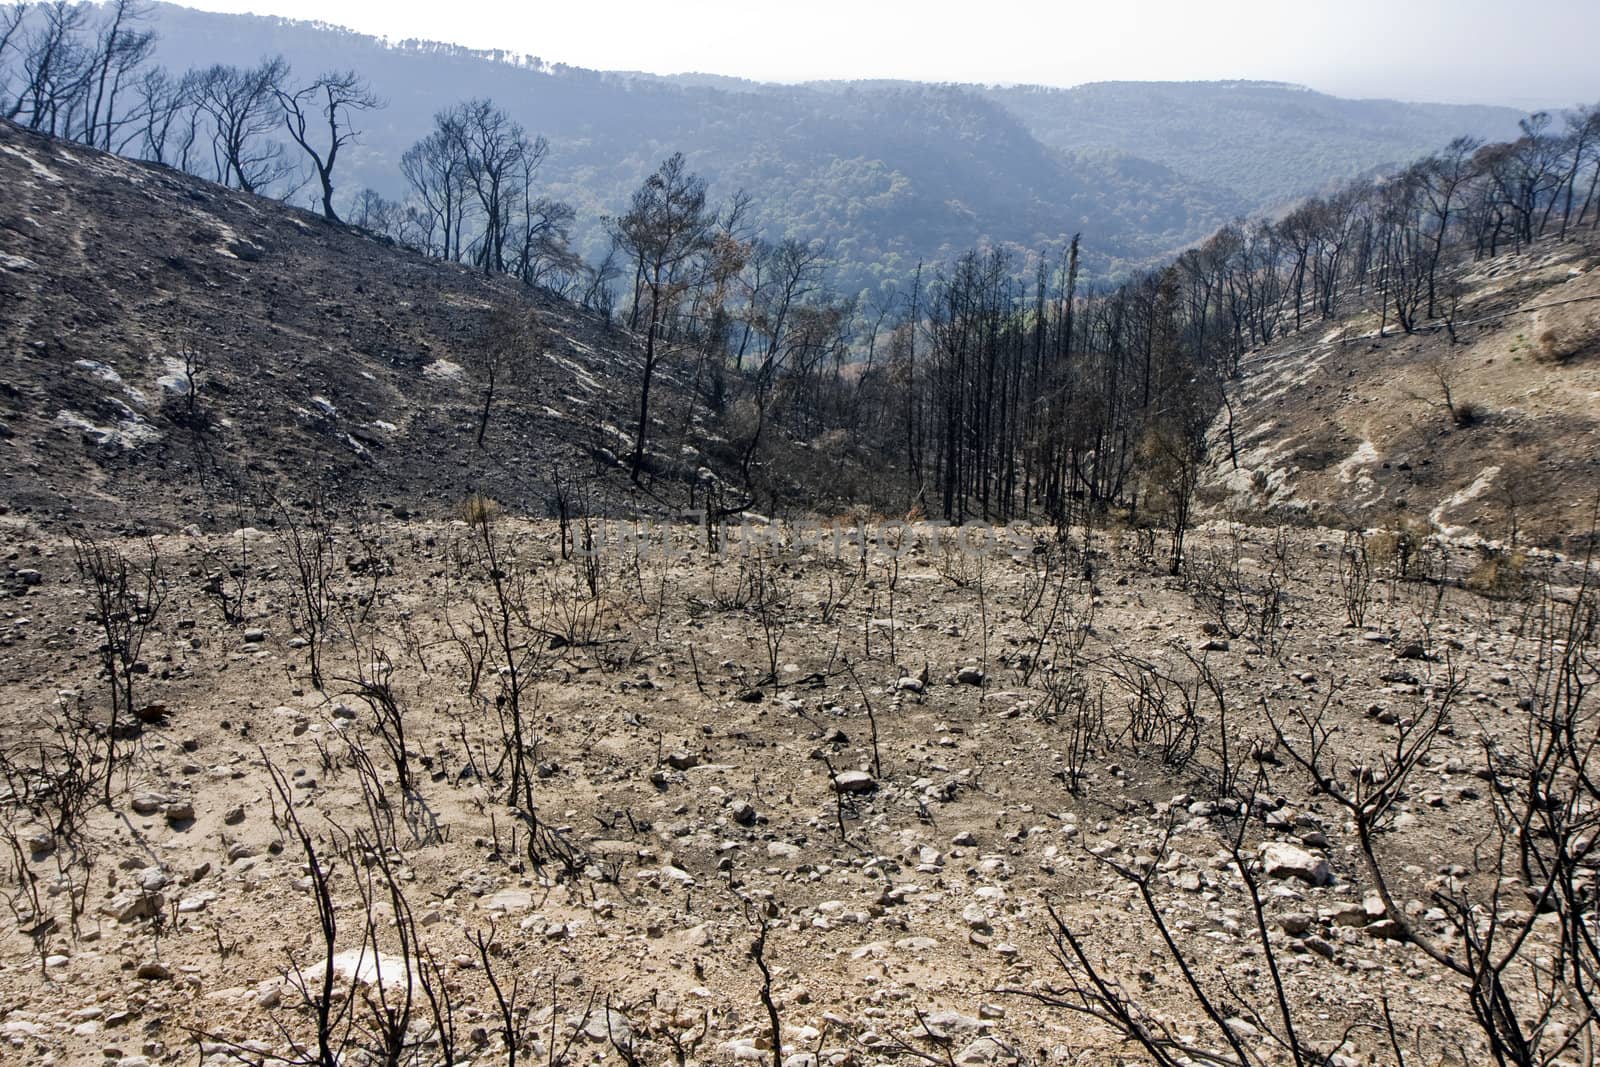 Forest at the Carmel mountain in Israel after fire